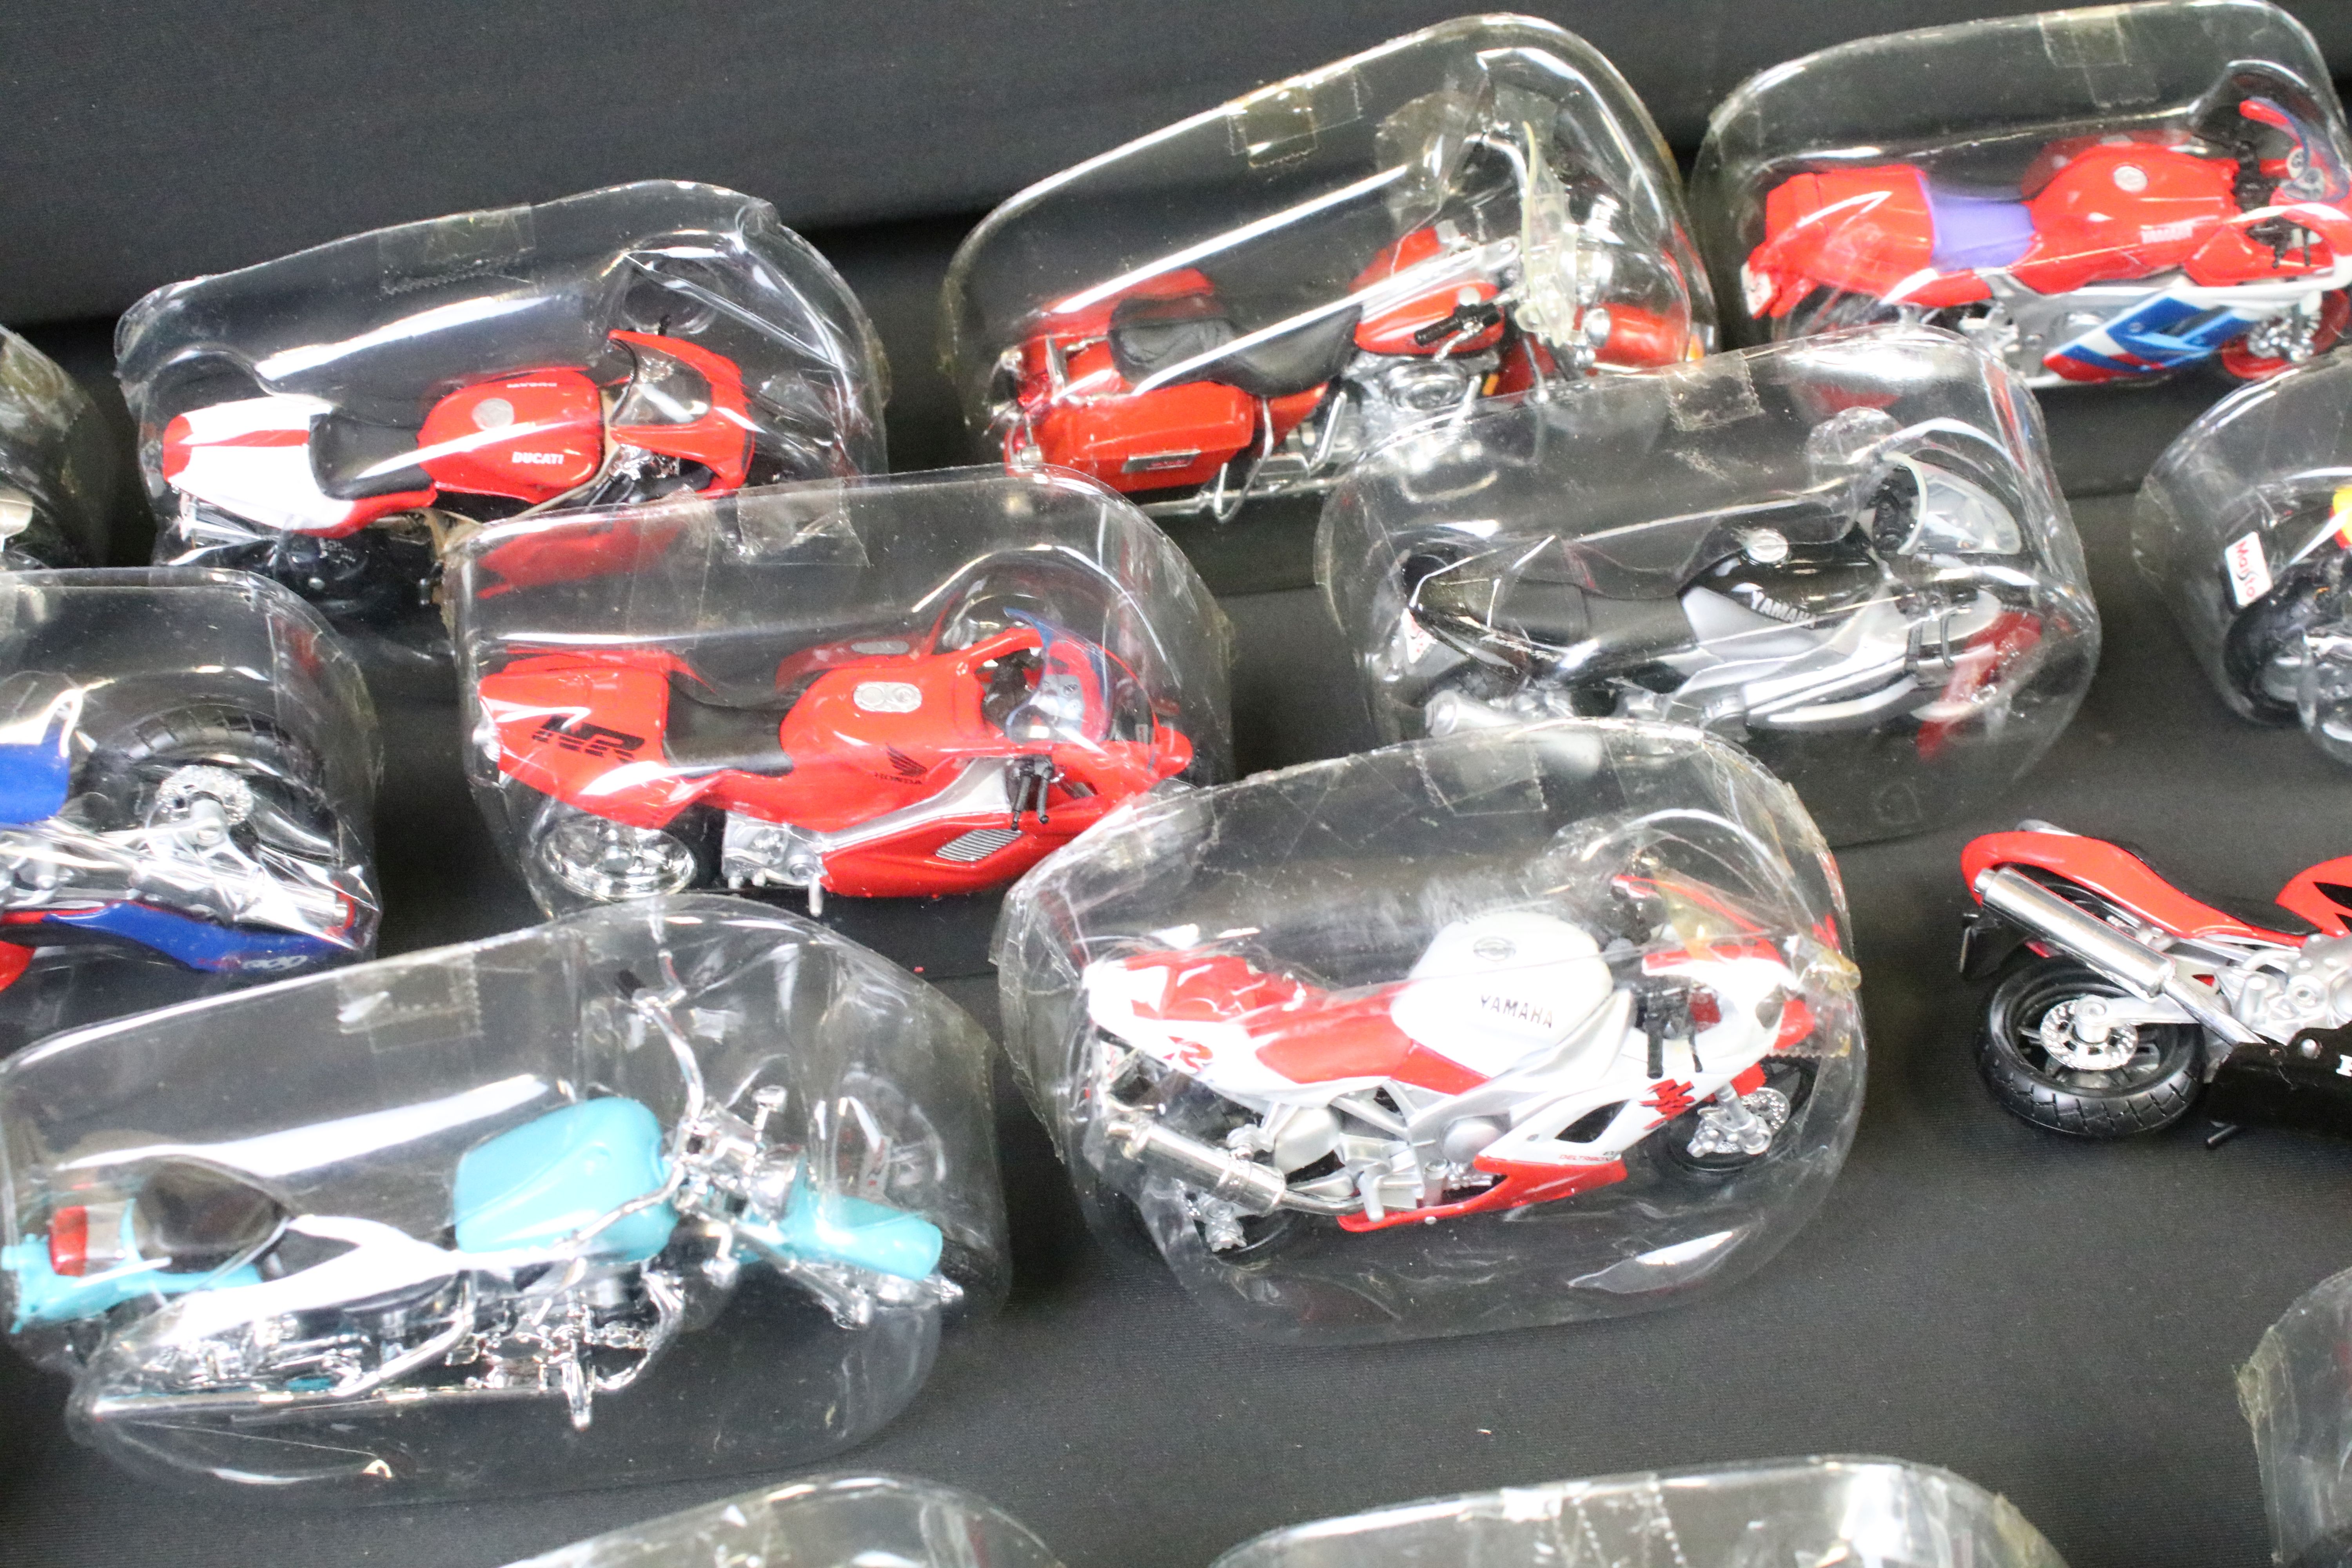 28 Maisto diecast motorbike models, all with plastic packaging and bases, ex - Image 9 of 12